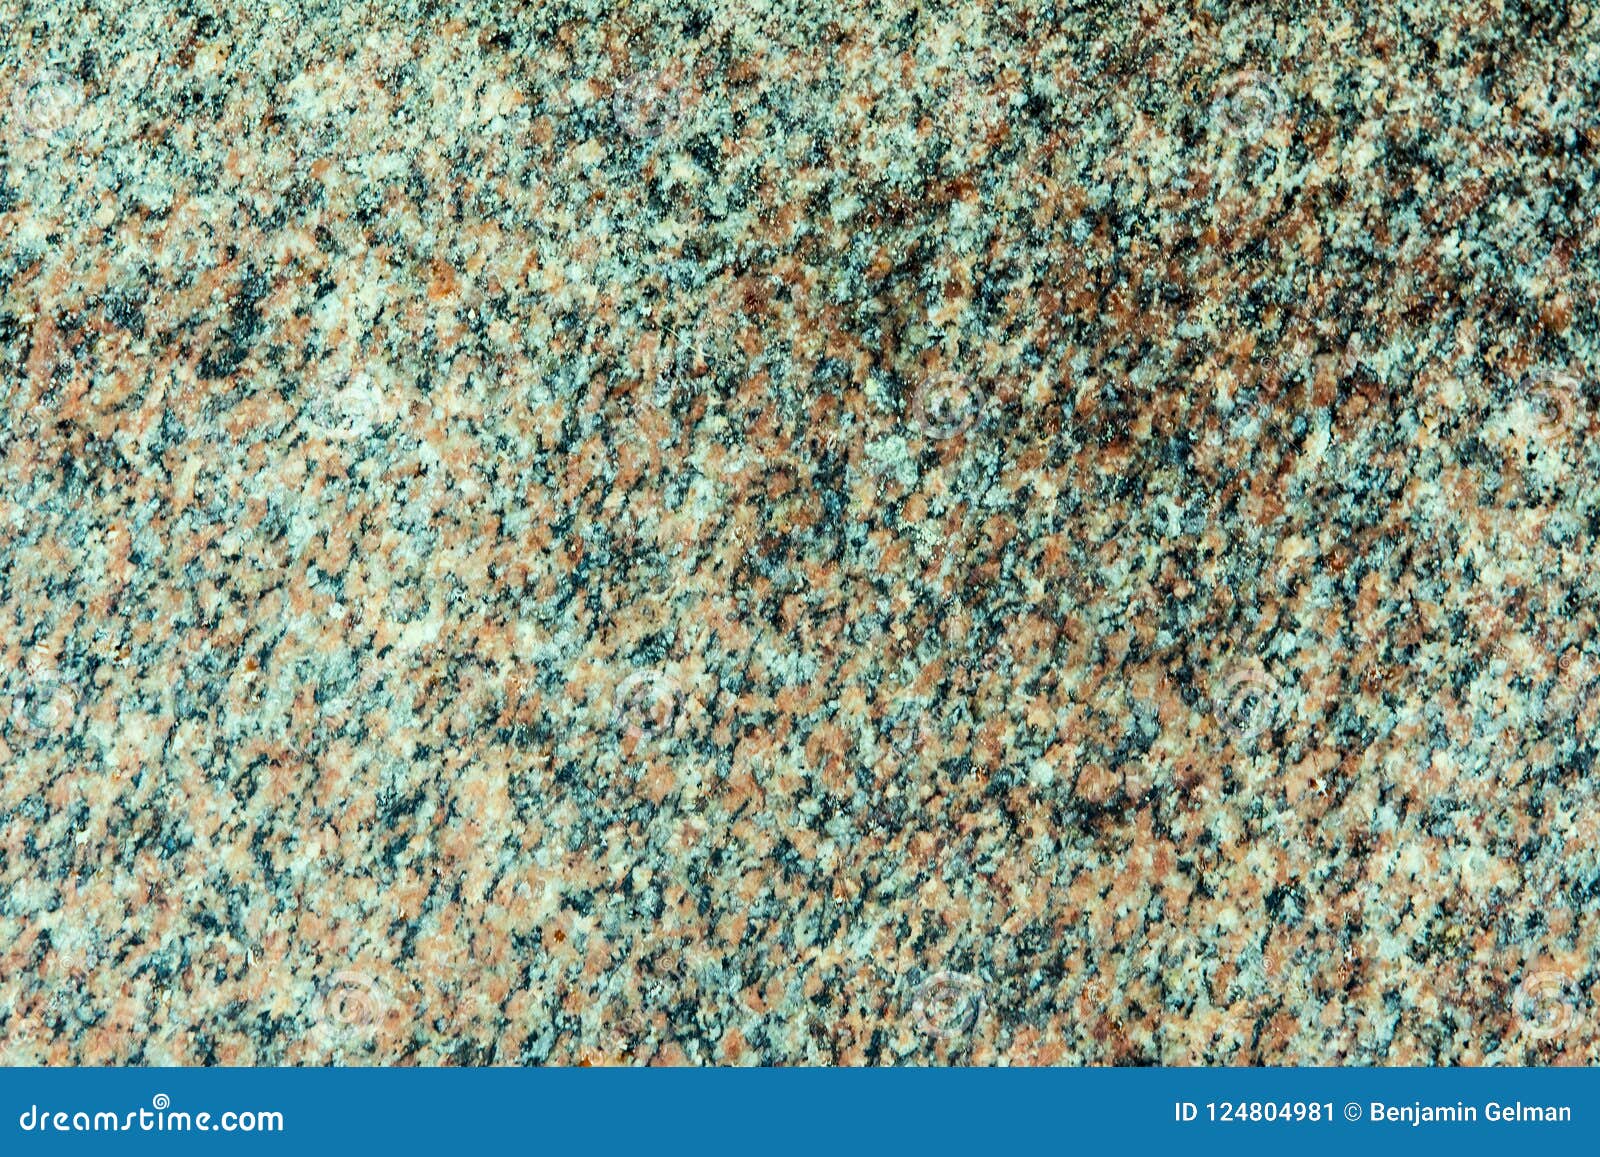 Background Granite With Brown Blue And Green Spots Stock Image